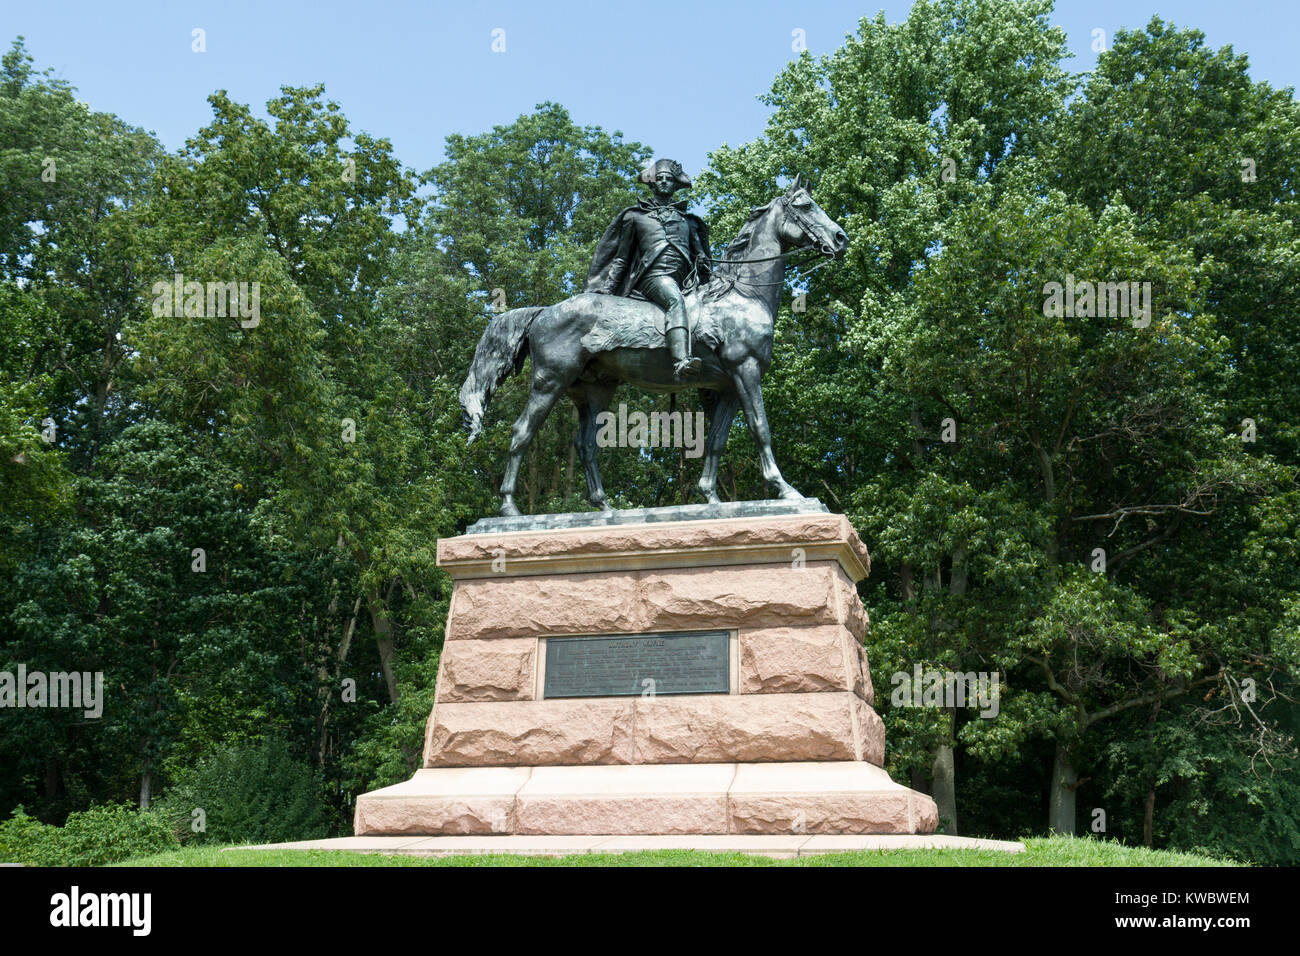 Der General Anthony Wayne Monument Valley Forge National Historical Park (U.S. National Park Service), Valley Forge, Pennsylvania, USA. Stockfoto